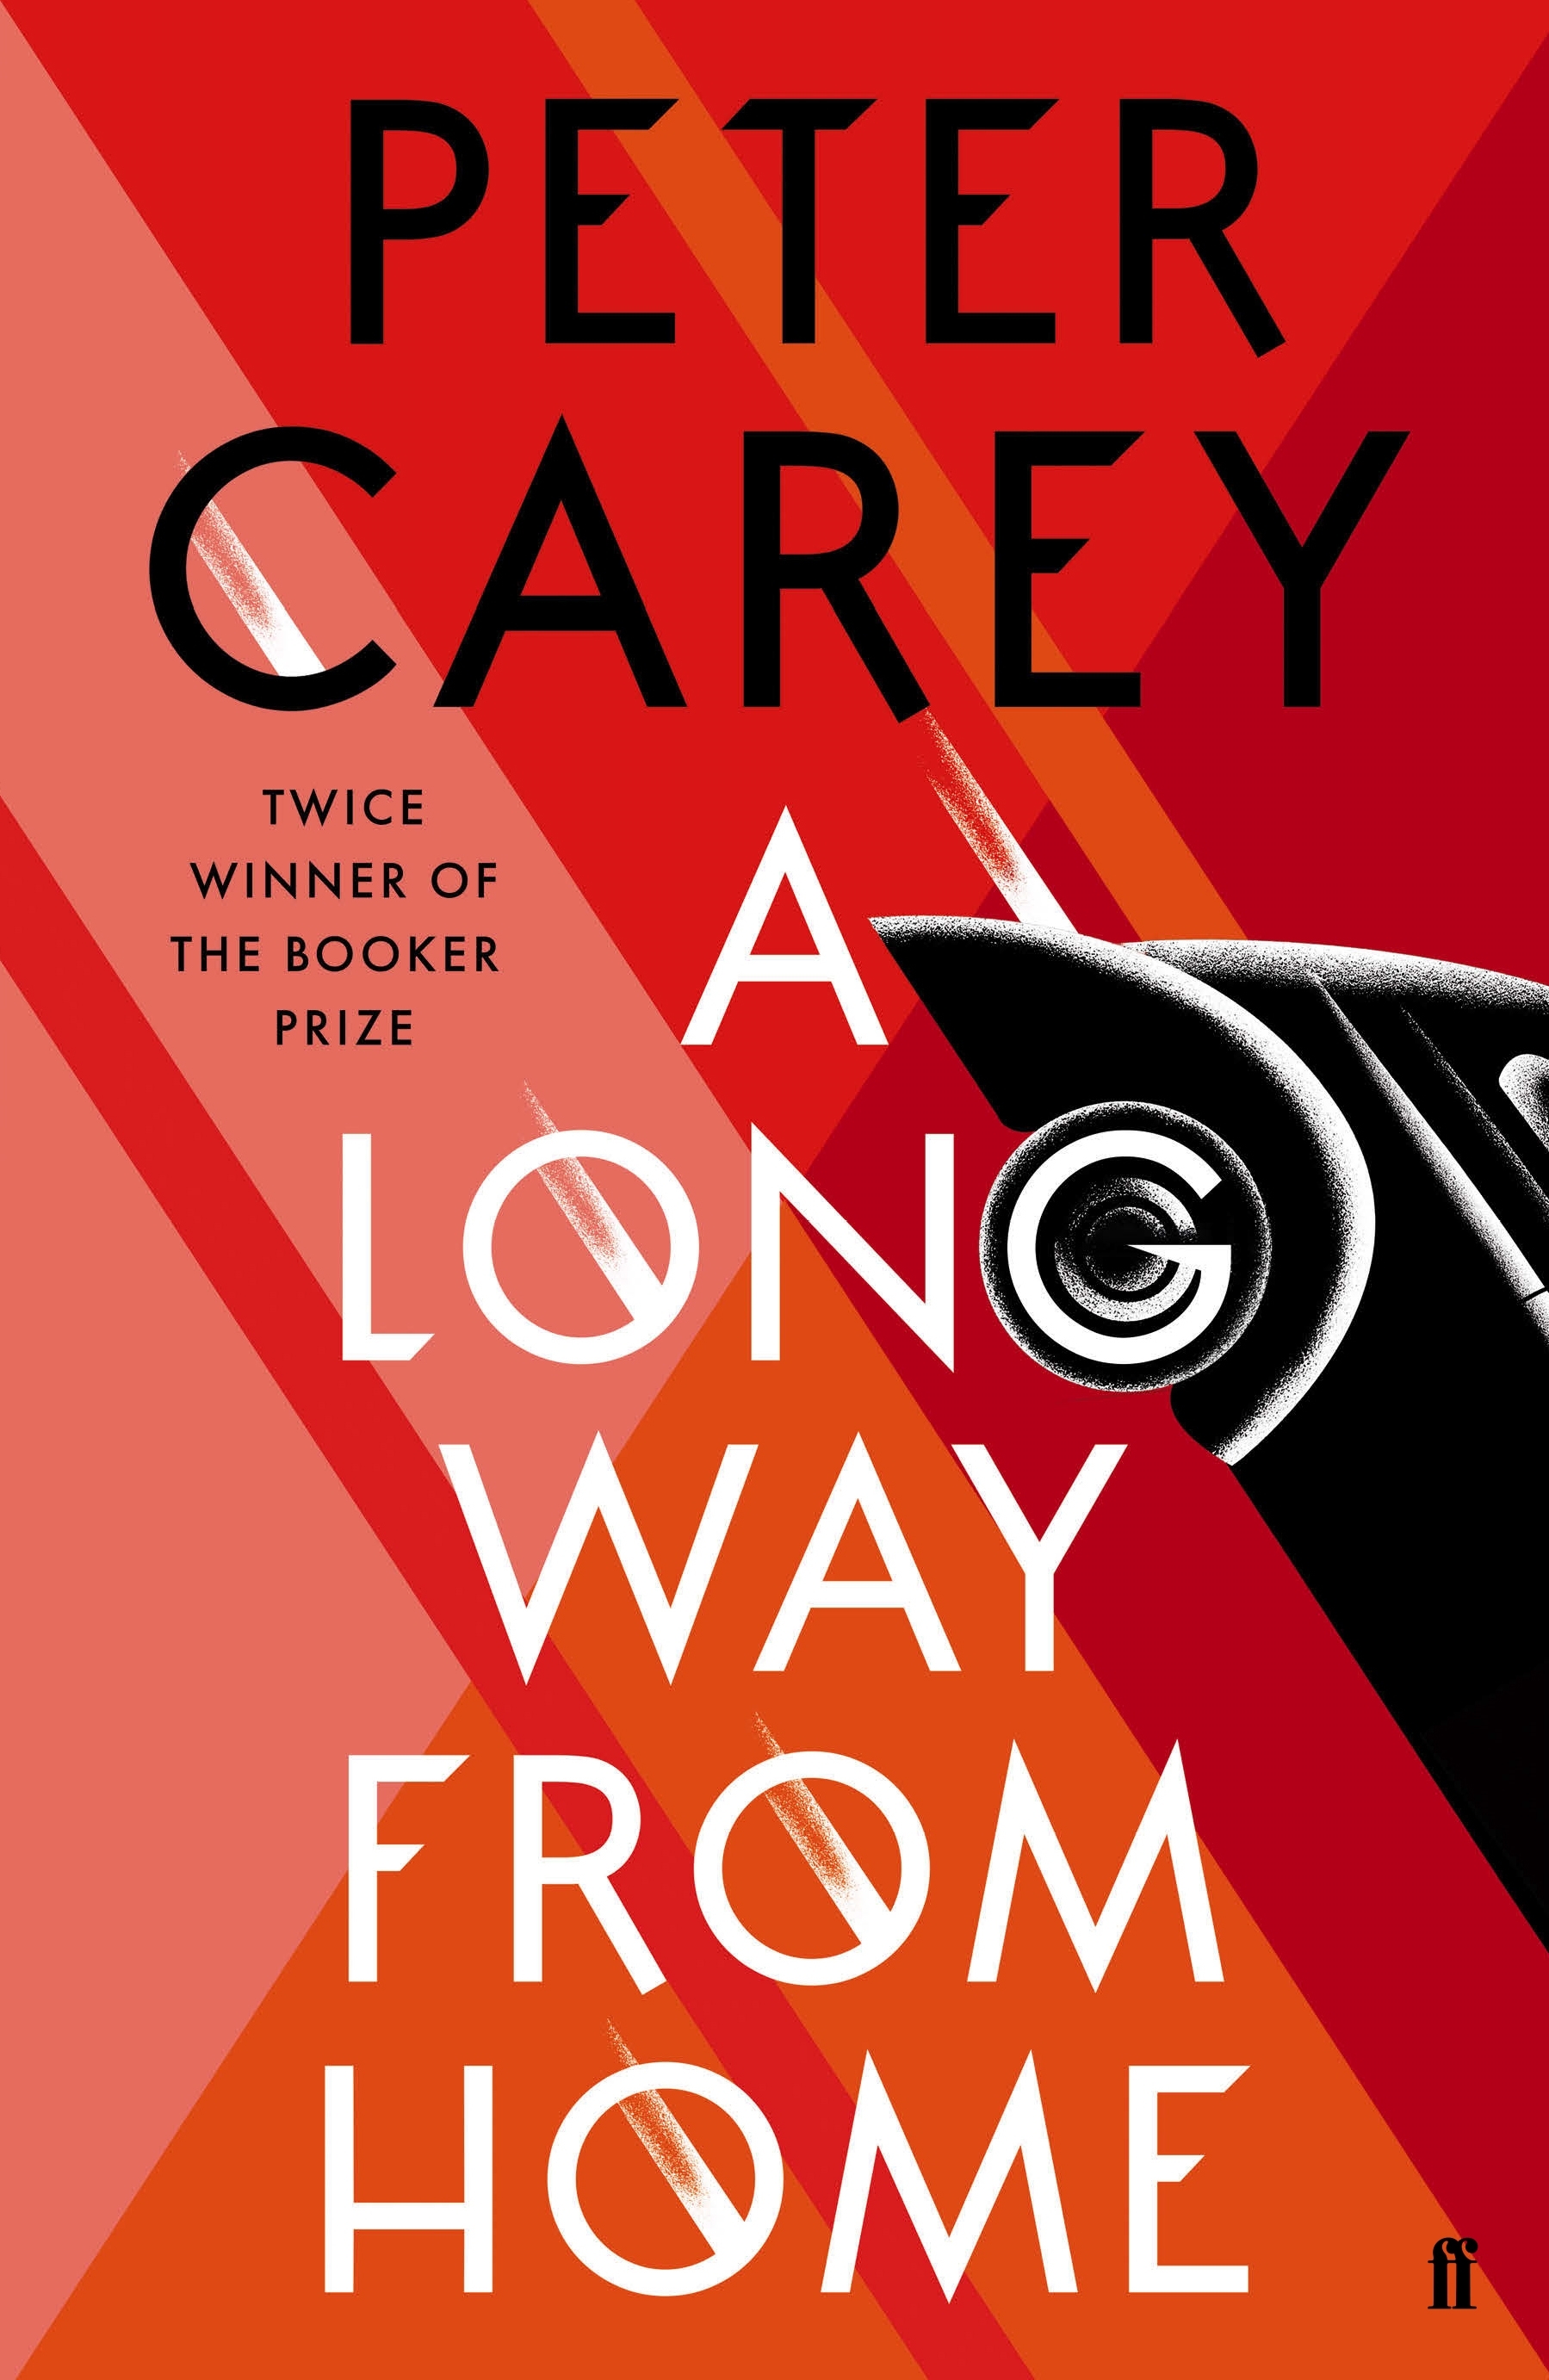 Peter Carey: A long way from home (2018)